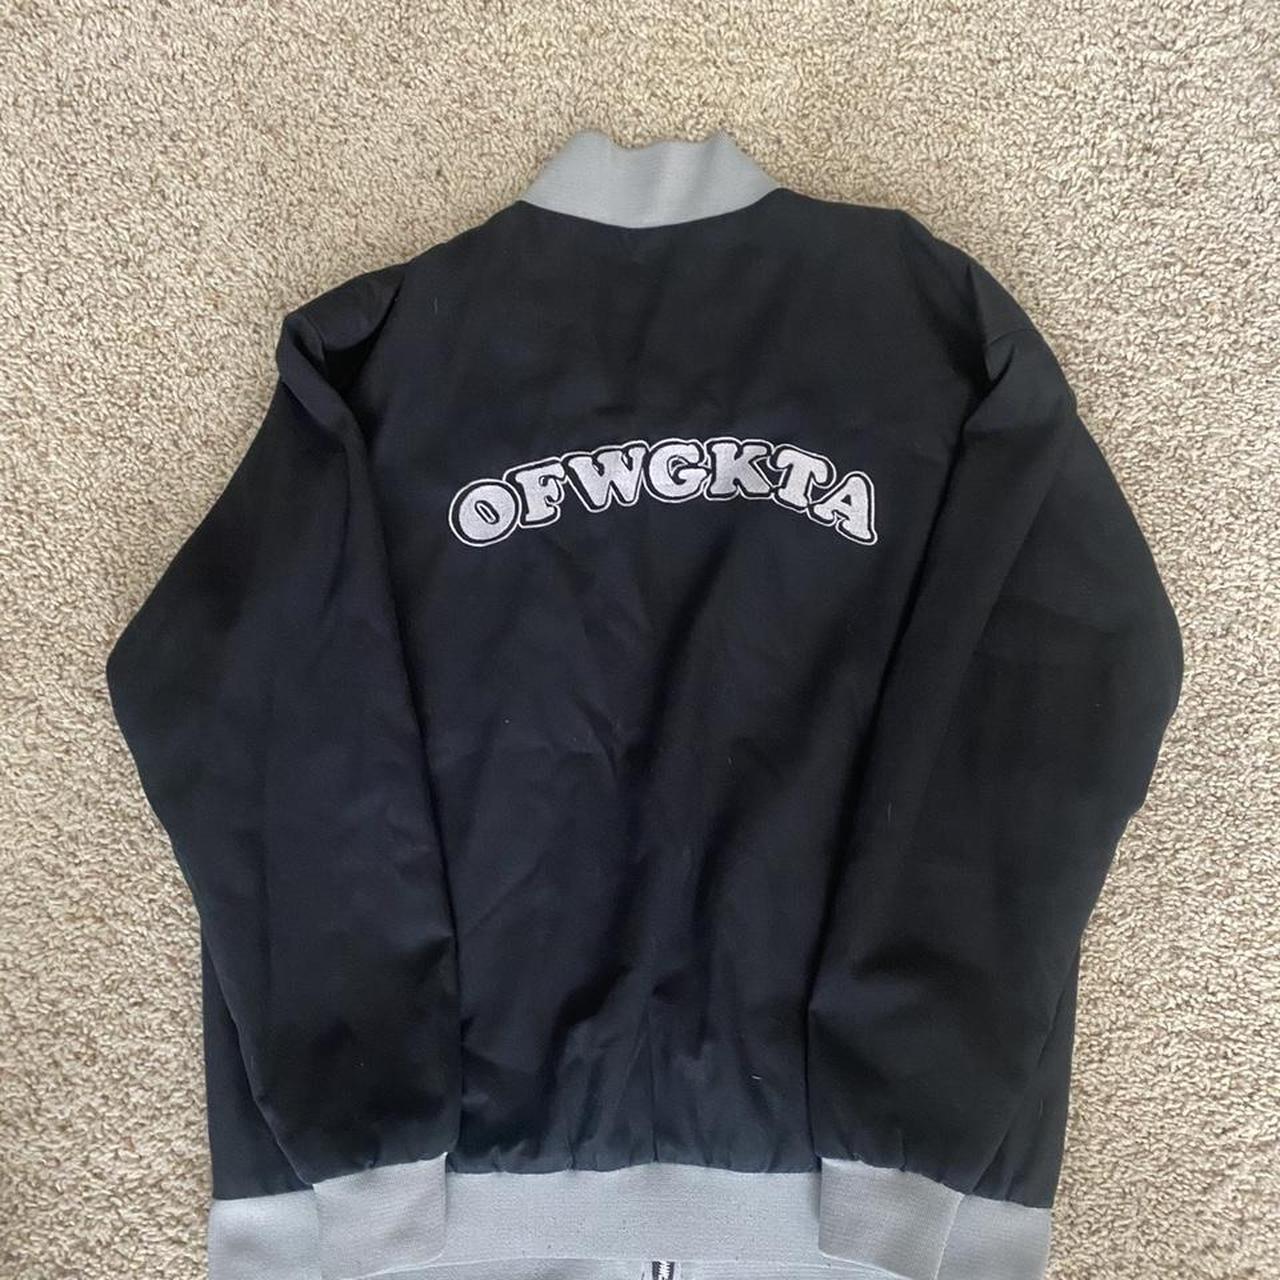 Odd Future Bomber Jacket This item is worn, in... - Depop